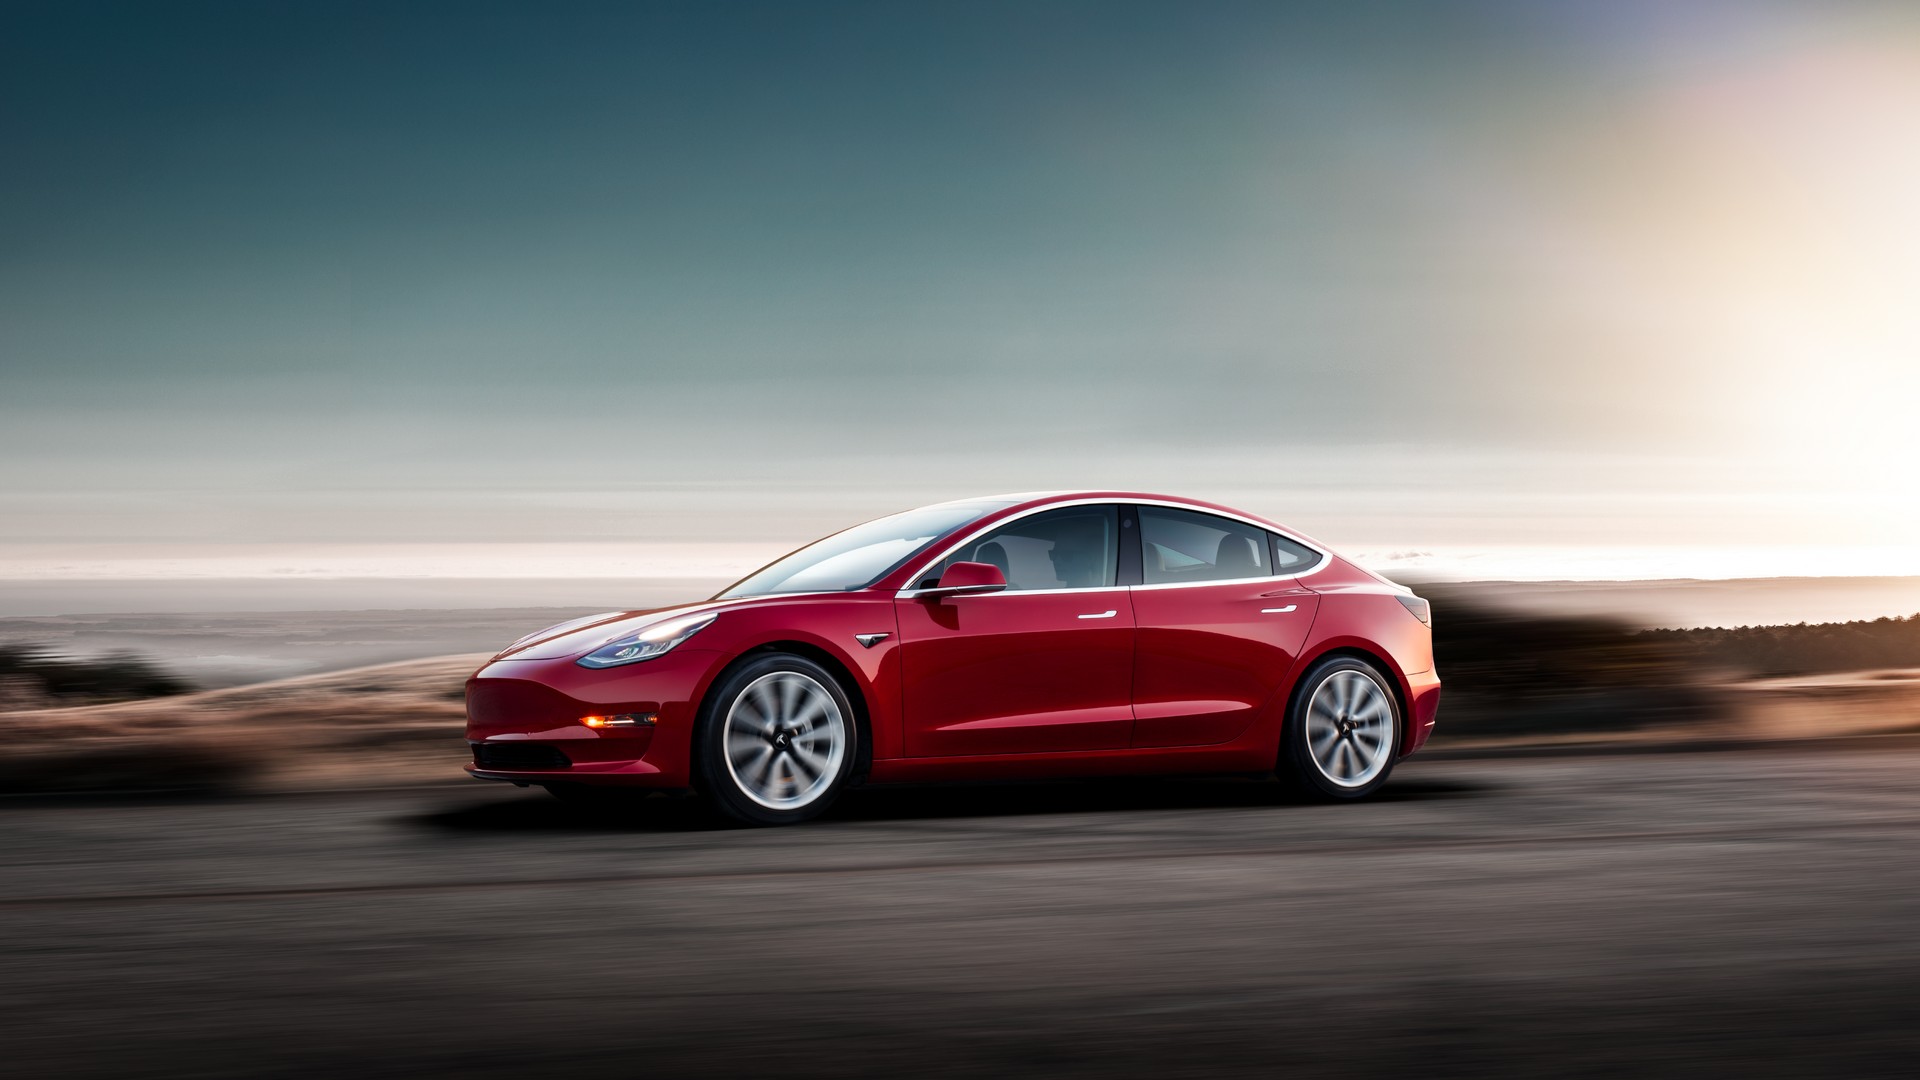 https://s1.cdn.autoevolution.com/images/news/gallery/chinese-survey-puts-tesla-model-3-s-build-quality-below-two-local-bev-models_7.jpg